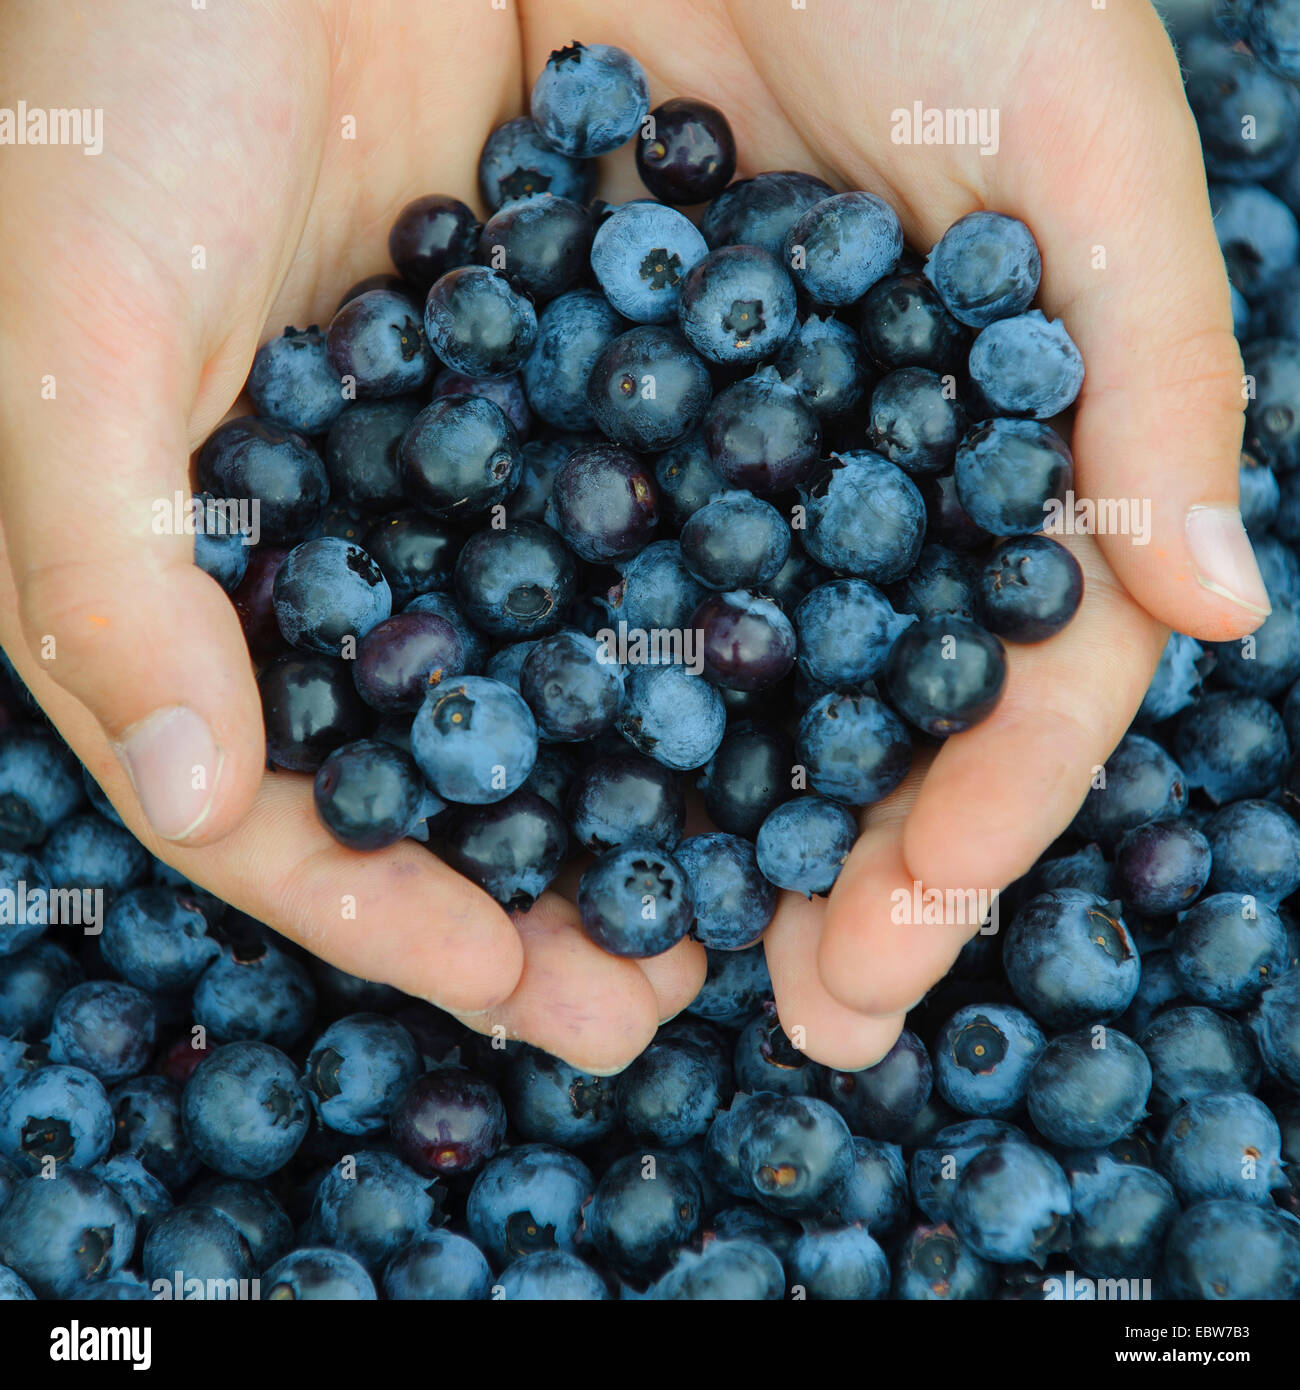 dwarf bilberry, blueberry, huckleberry, low billberry (Vaccinium myrtillus), ripe blue berries in two hands, Germany, Lower Saxony Stock Photo